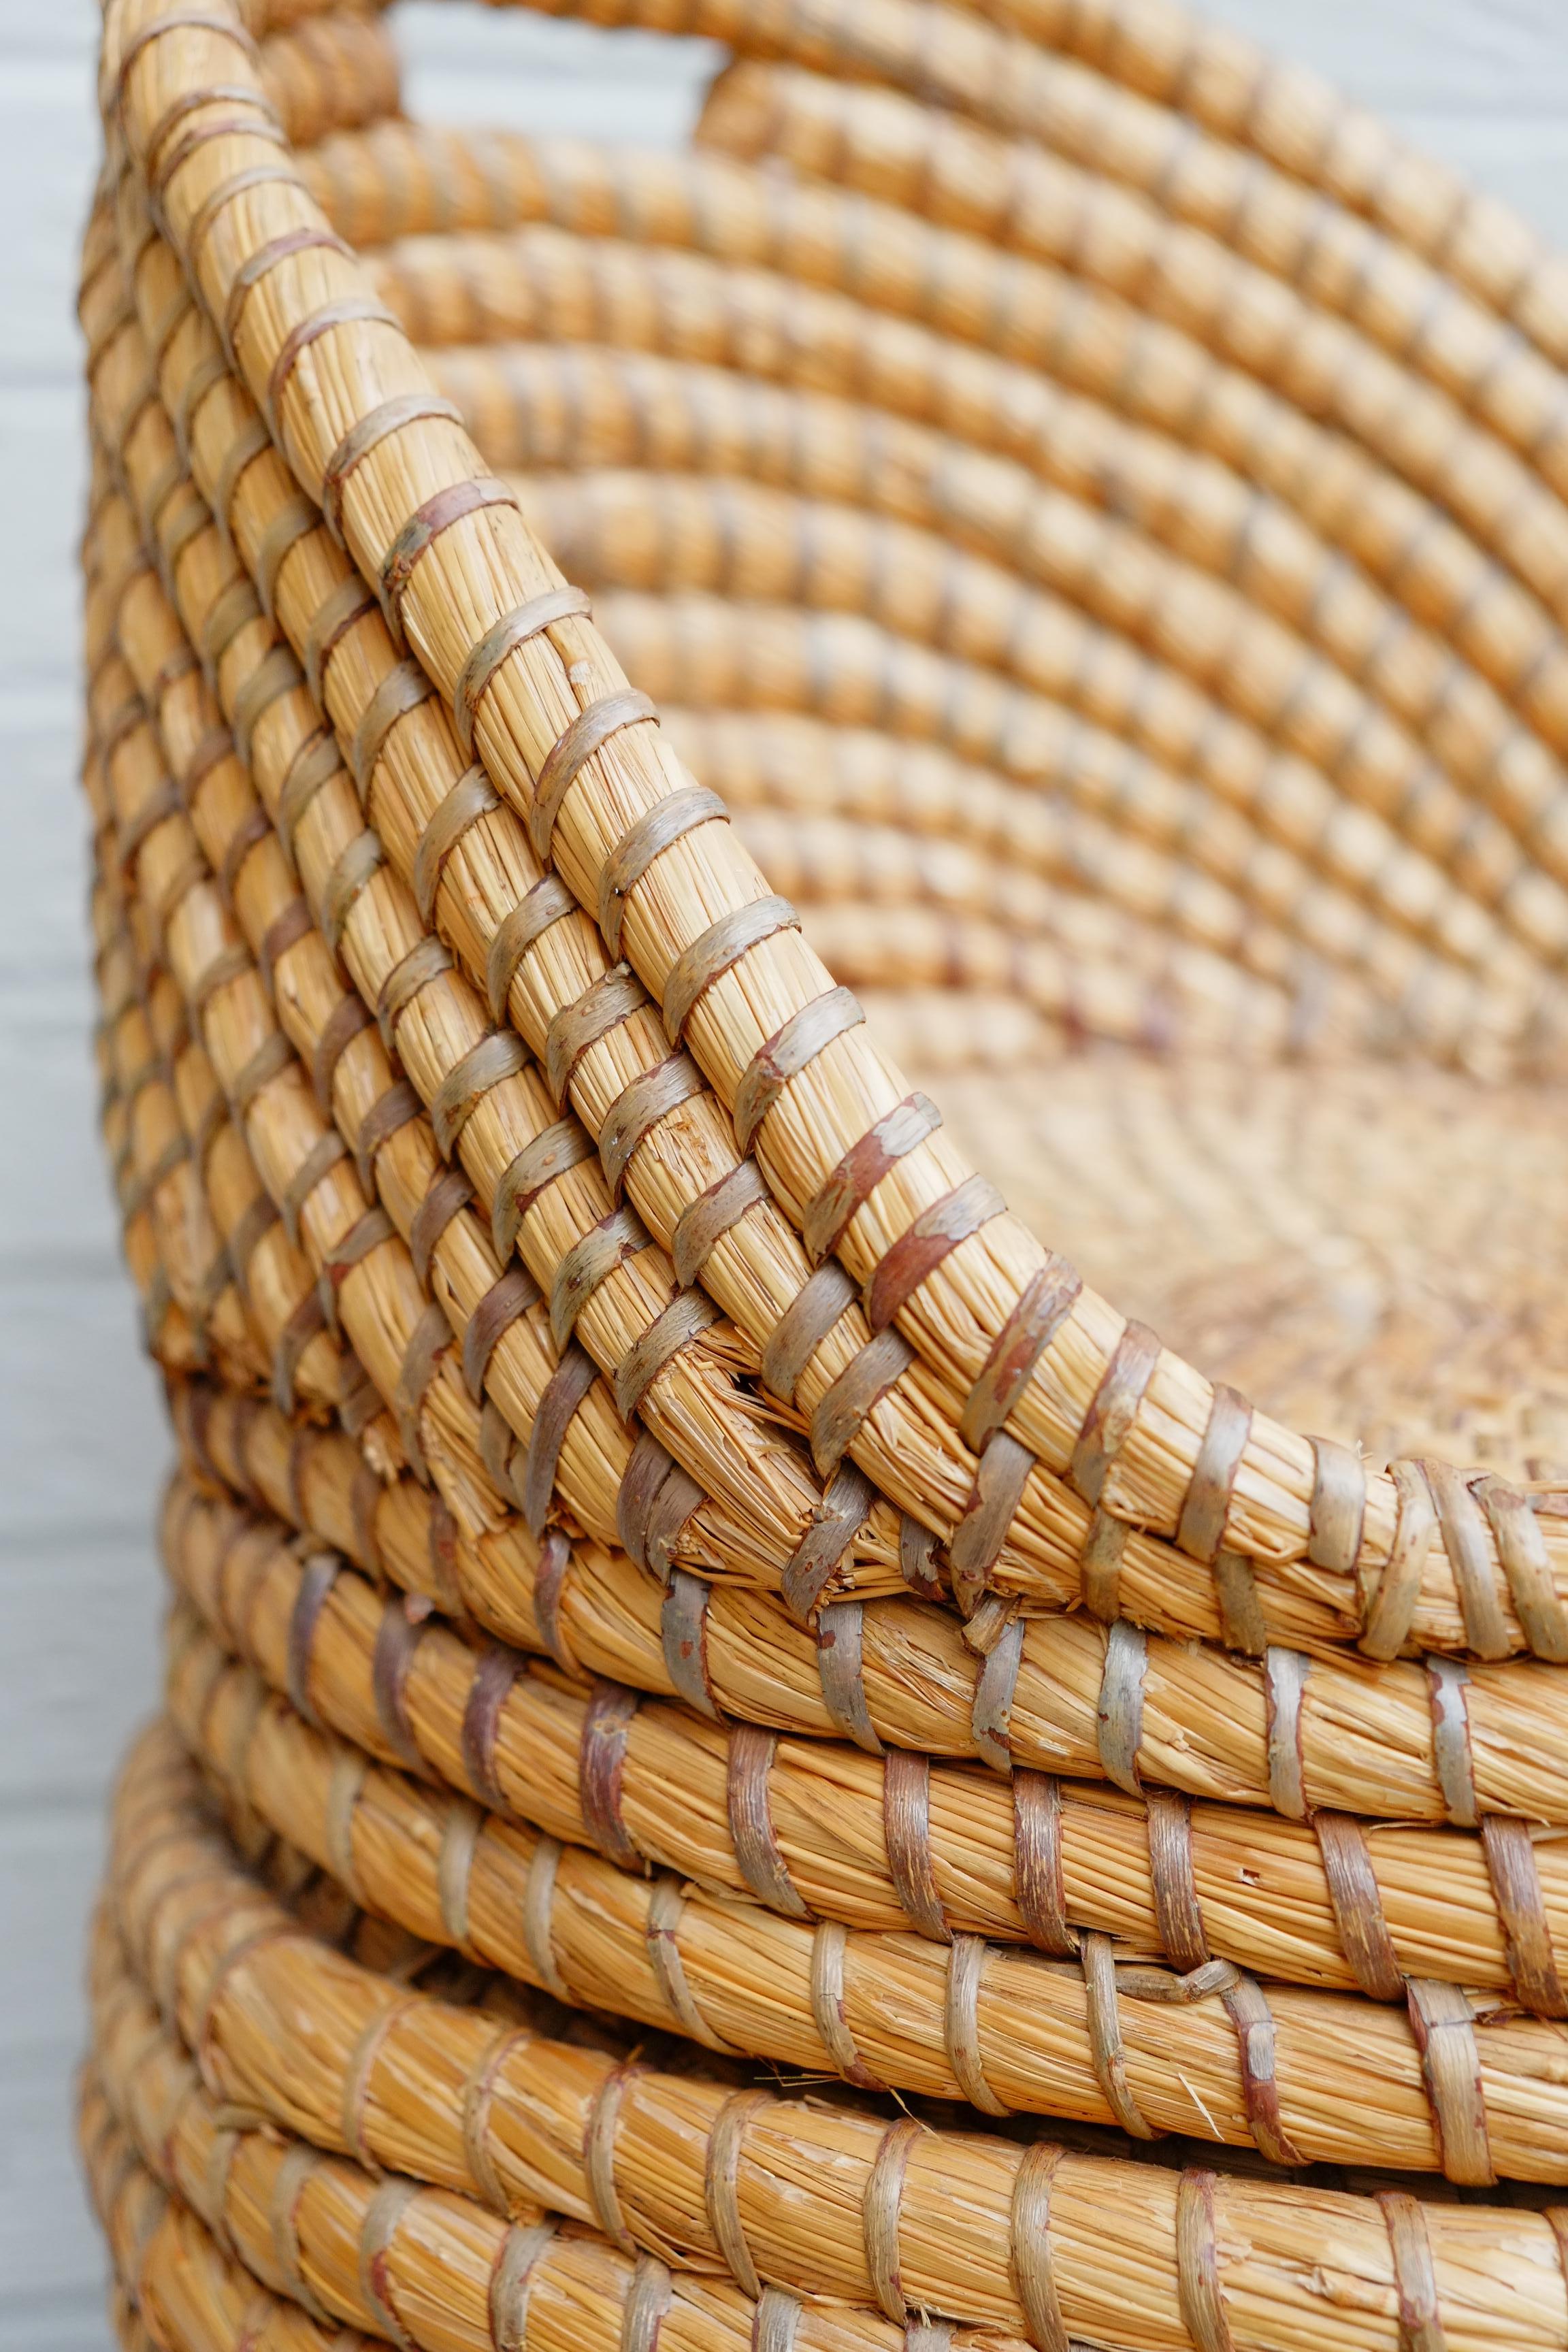 English Midcentury Bohemian Reeded Hand Woven Straw Basket Chair / Laundry Basket Seat For Sale